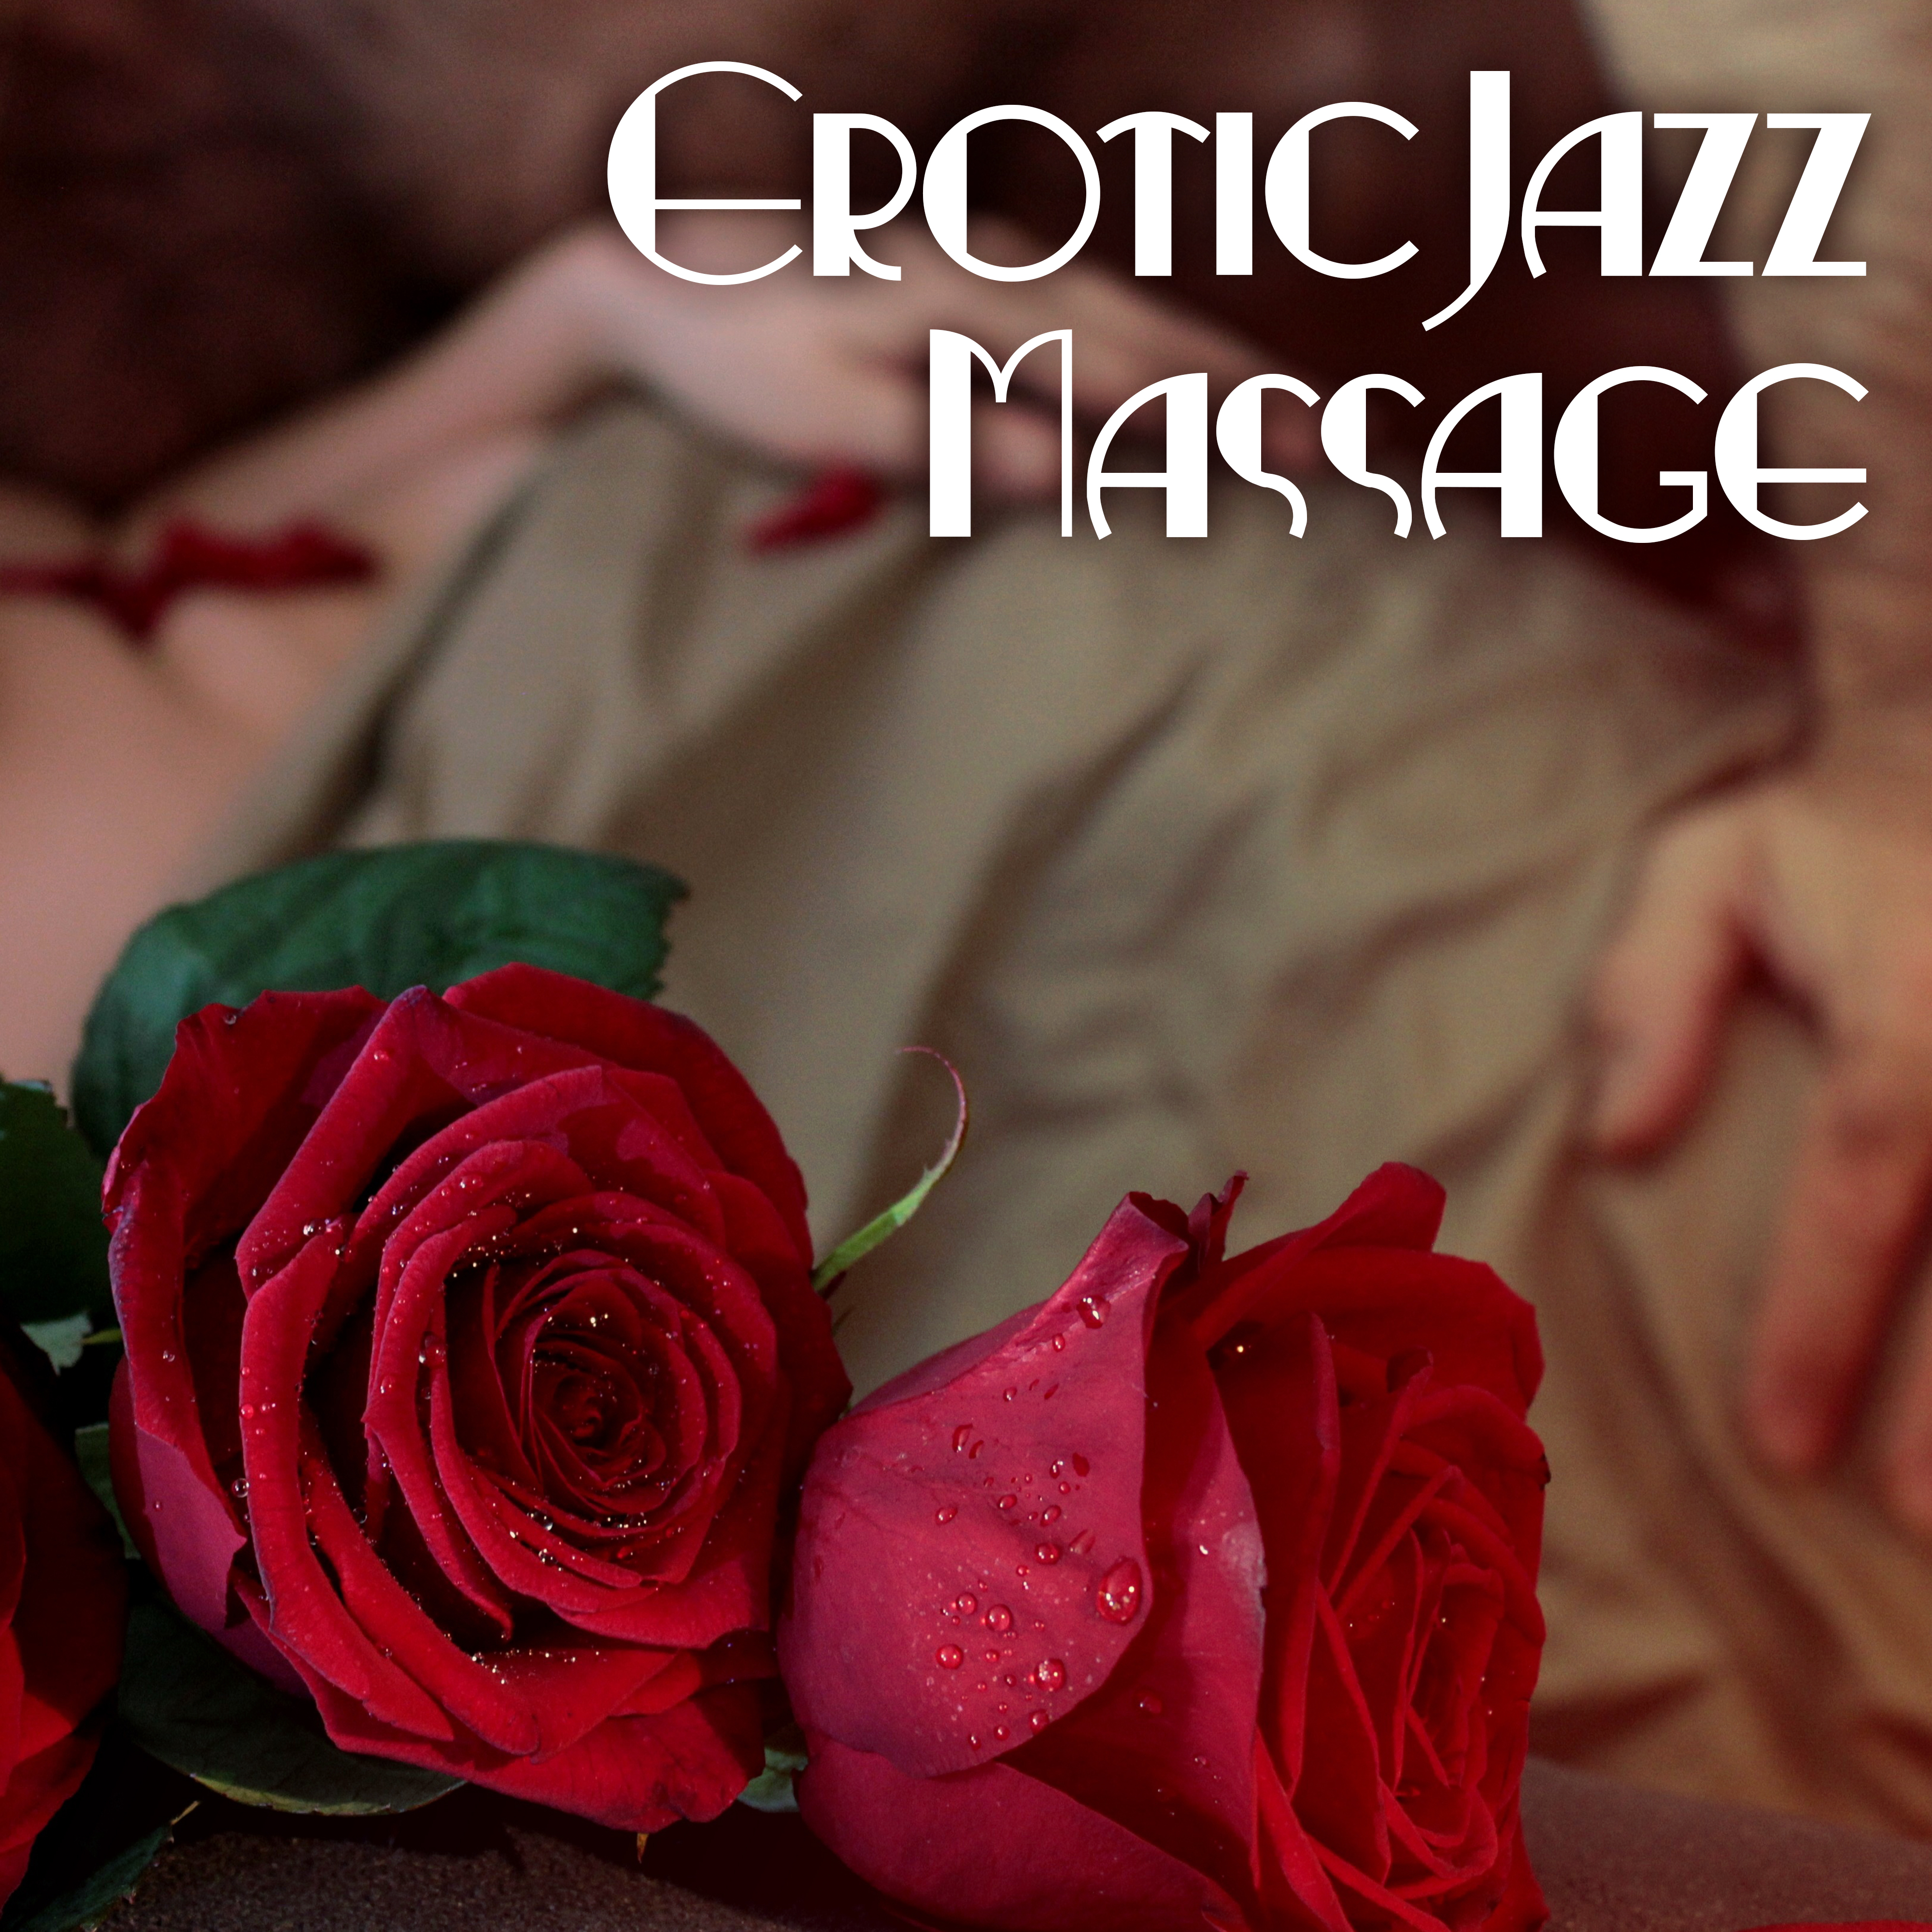 Erotic Jazz Massage  Romantic Evening,  Jazz Music, Smooth Sounds to Relax, Lovers Melodies